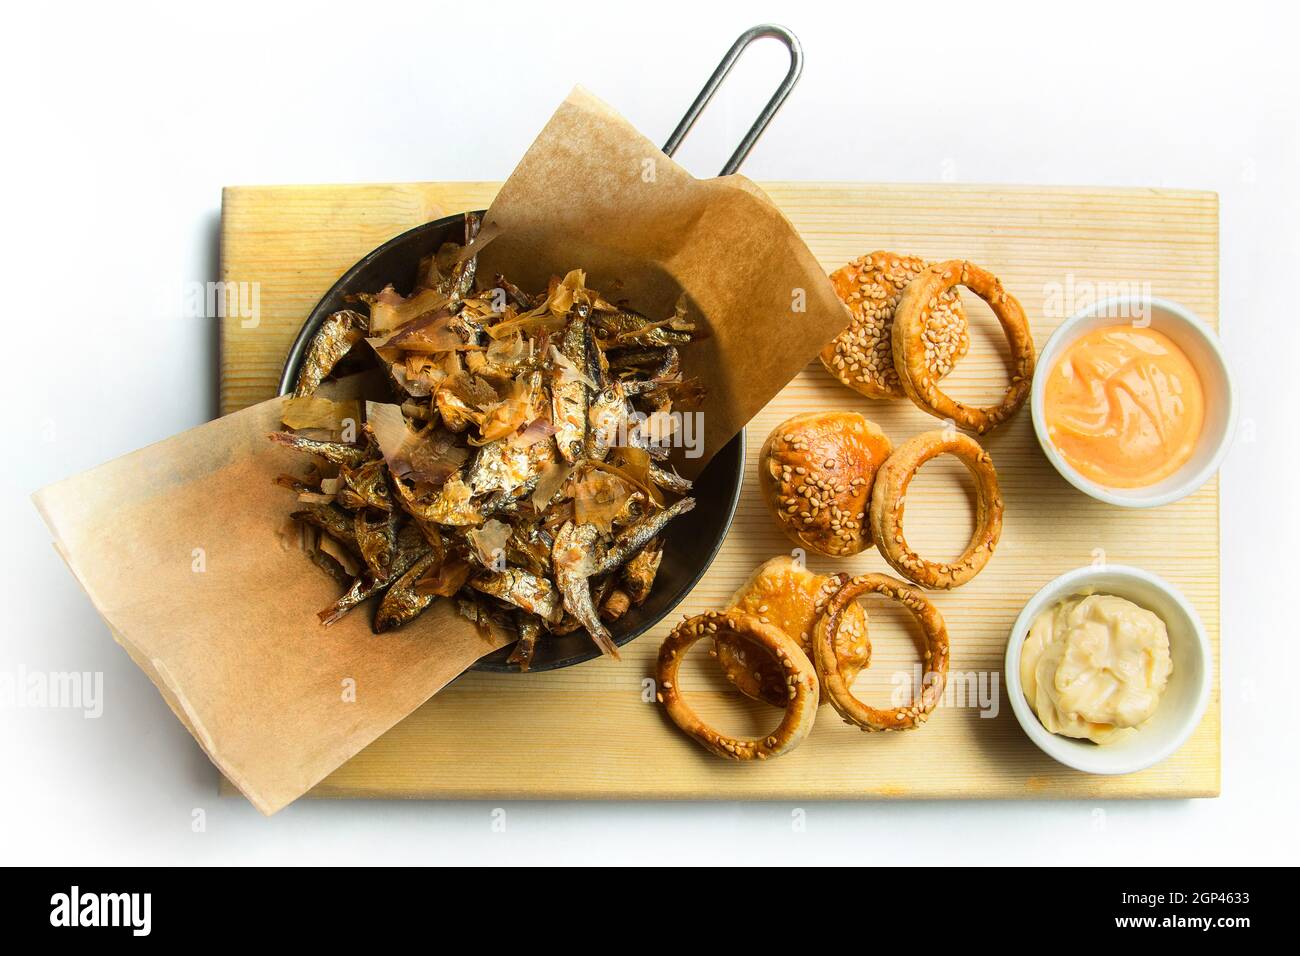 Beer snack: spicy chicken wings, cheese balls, fried black bread toast with garlic, onion rings in batter. Snack on a white background. Stock Photo